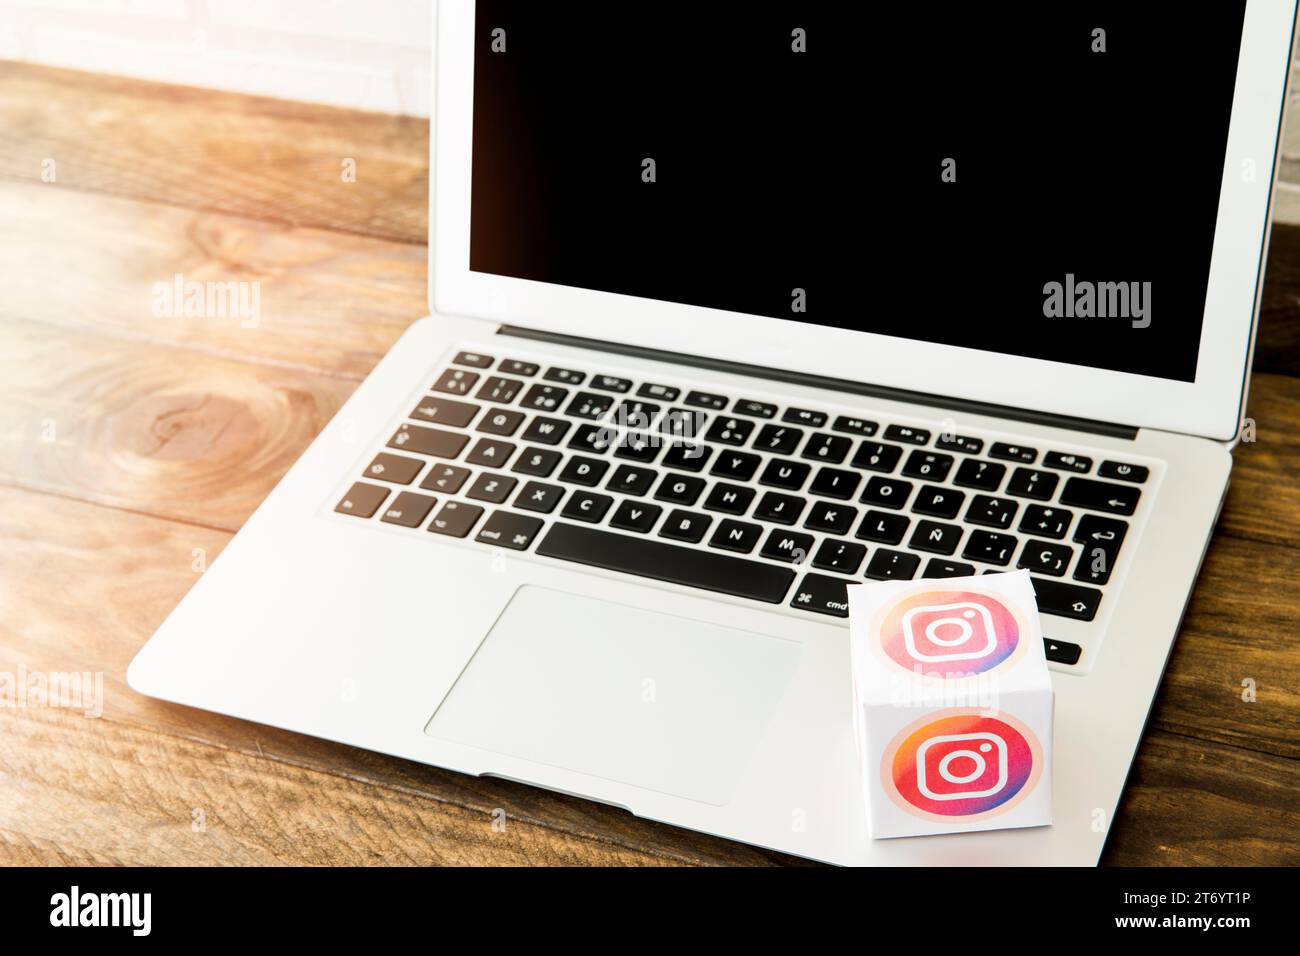 Laptop with instagram icon box office desk Stock Photo